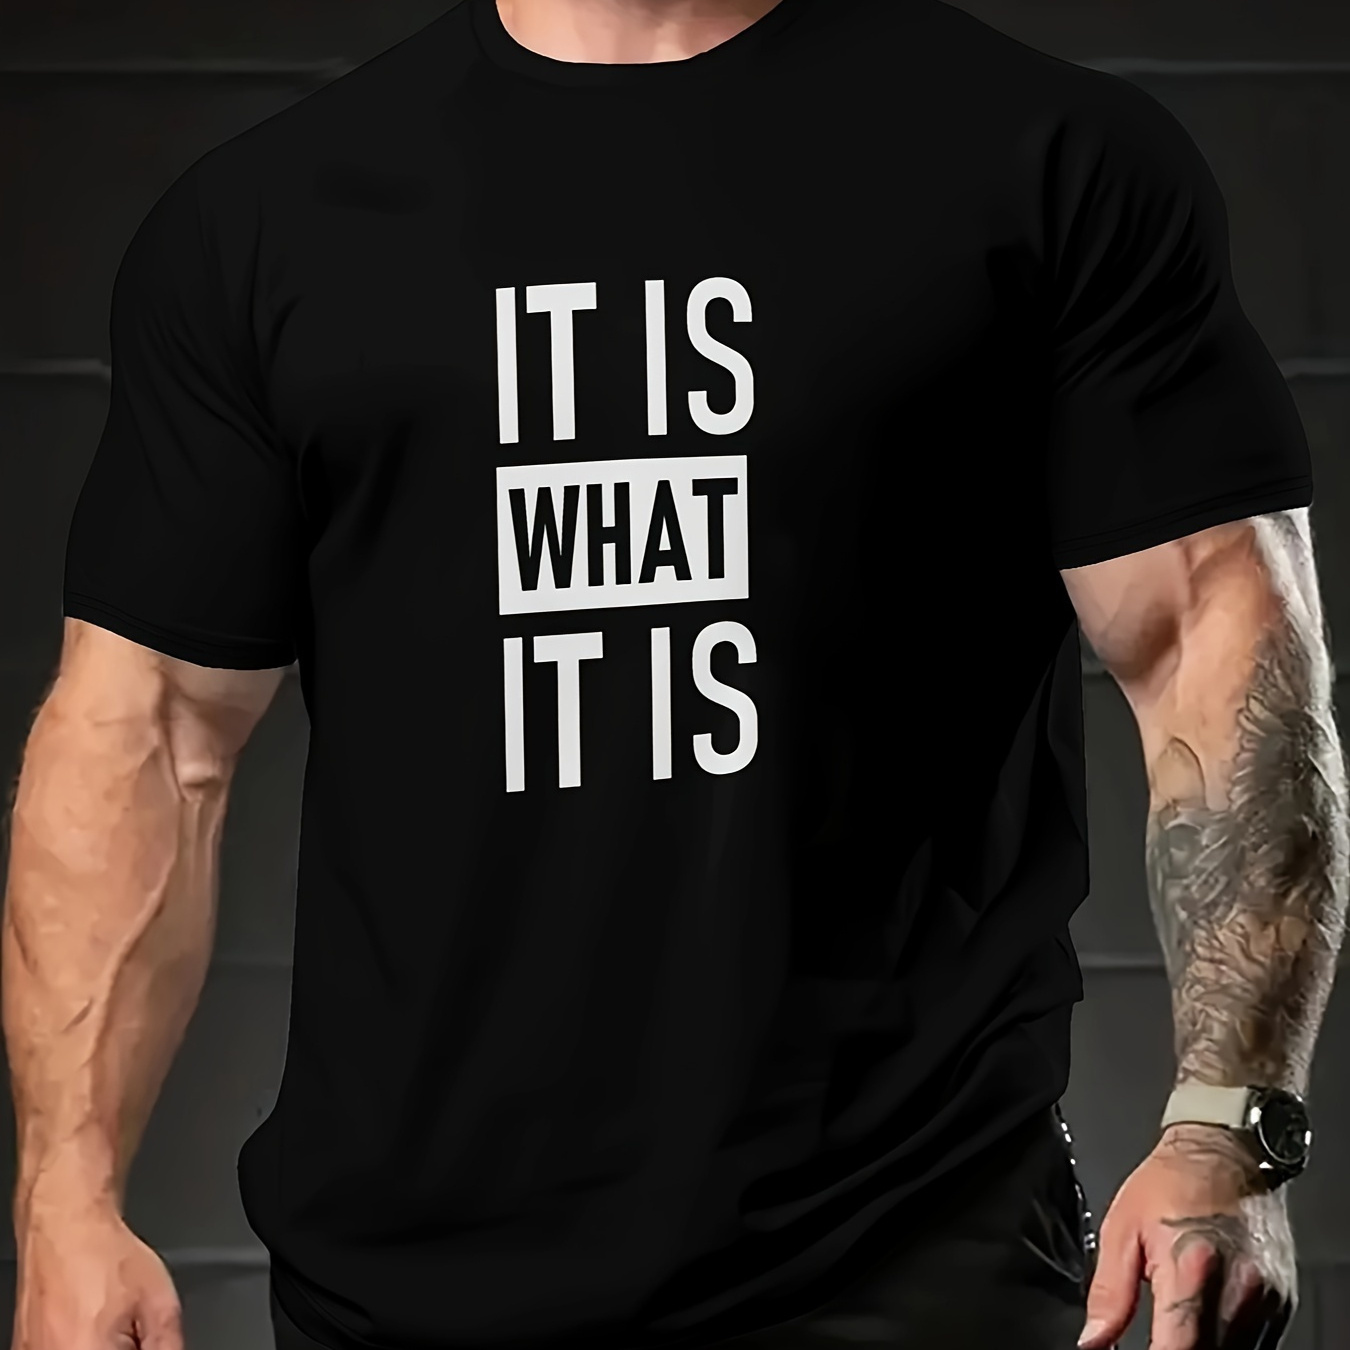 

100% Cotton T-shirtplus Size Men's It Is What It Is Print T-shirt, Casual Comfy Crew Neck Short Sleeve Tee For Summer Outdoor, Men's Clothingsummer Fashion Outdoor Sports